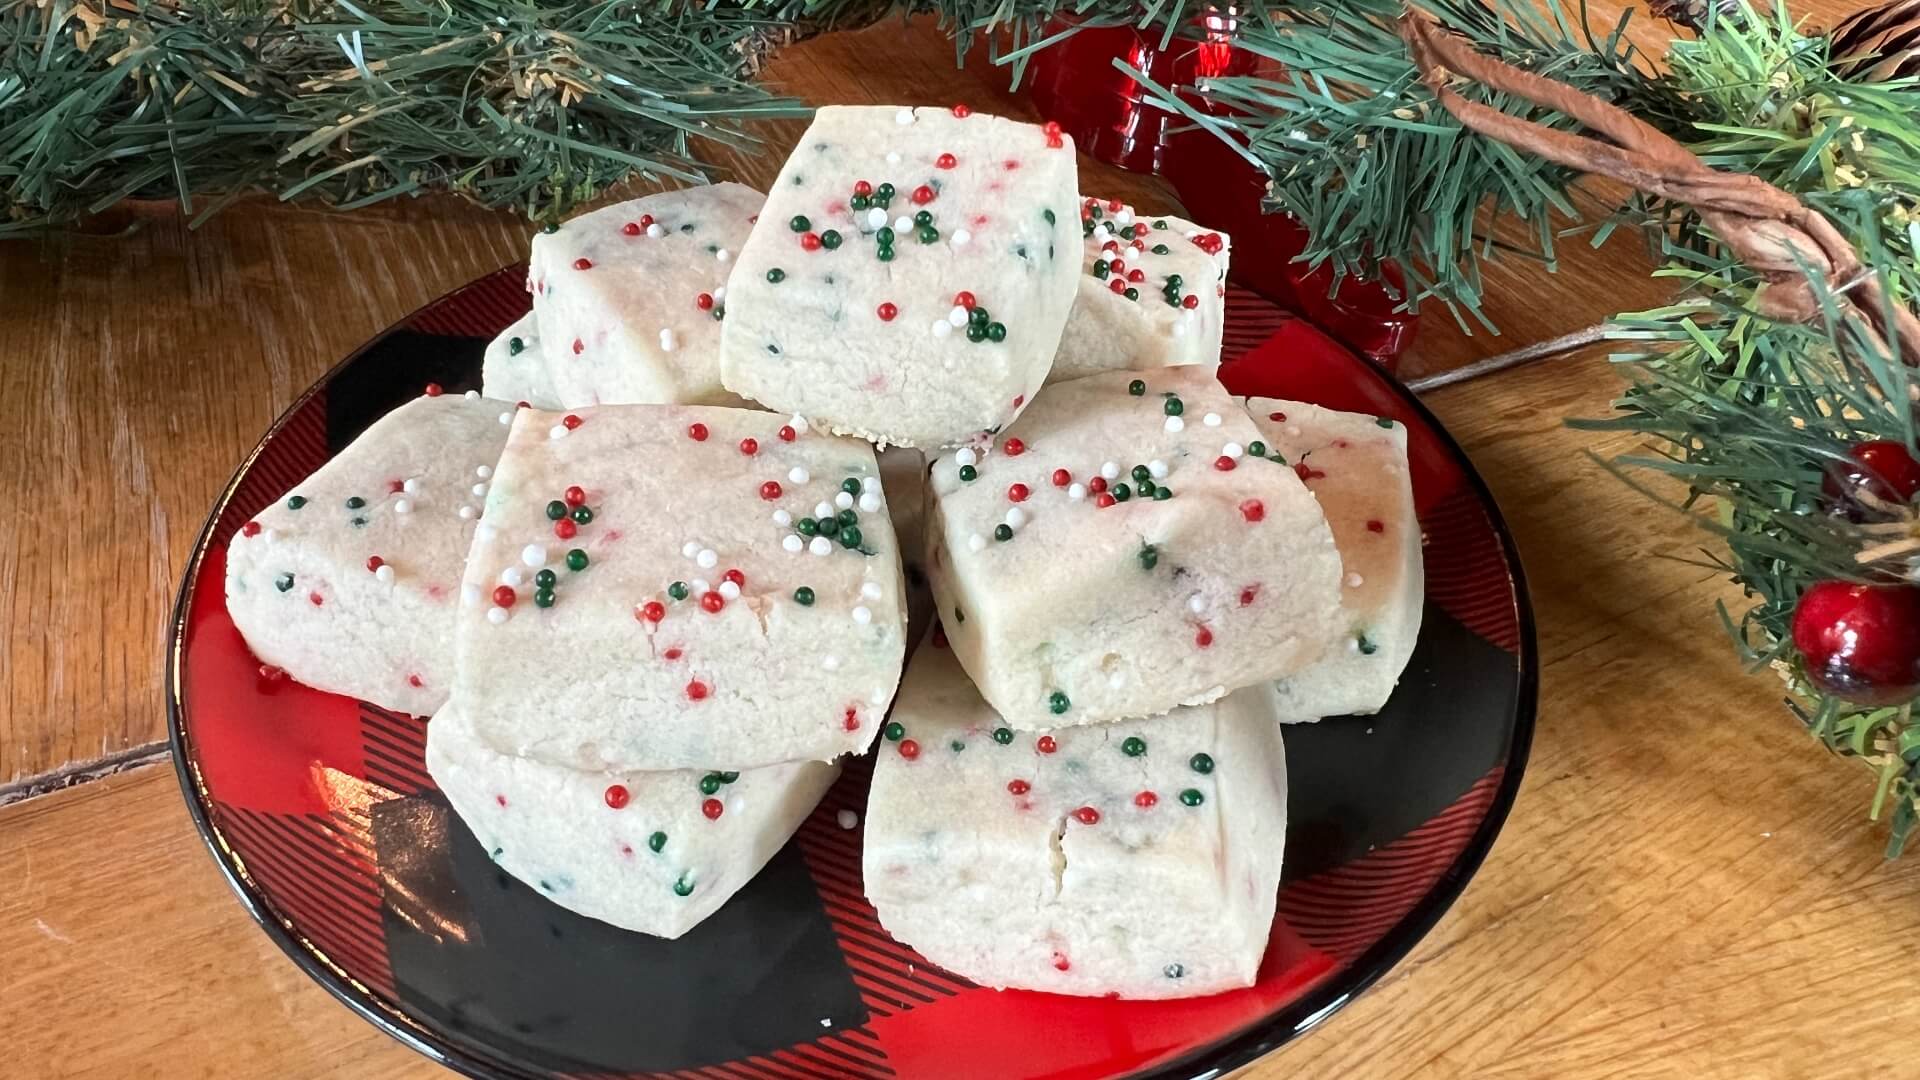 White shortbread cookie squares filled with red, white and green sprinkles.